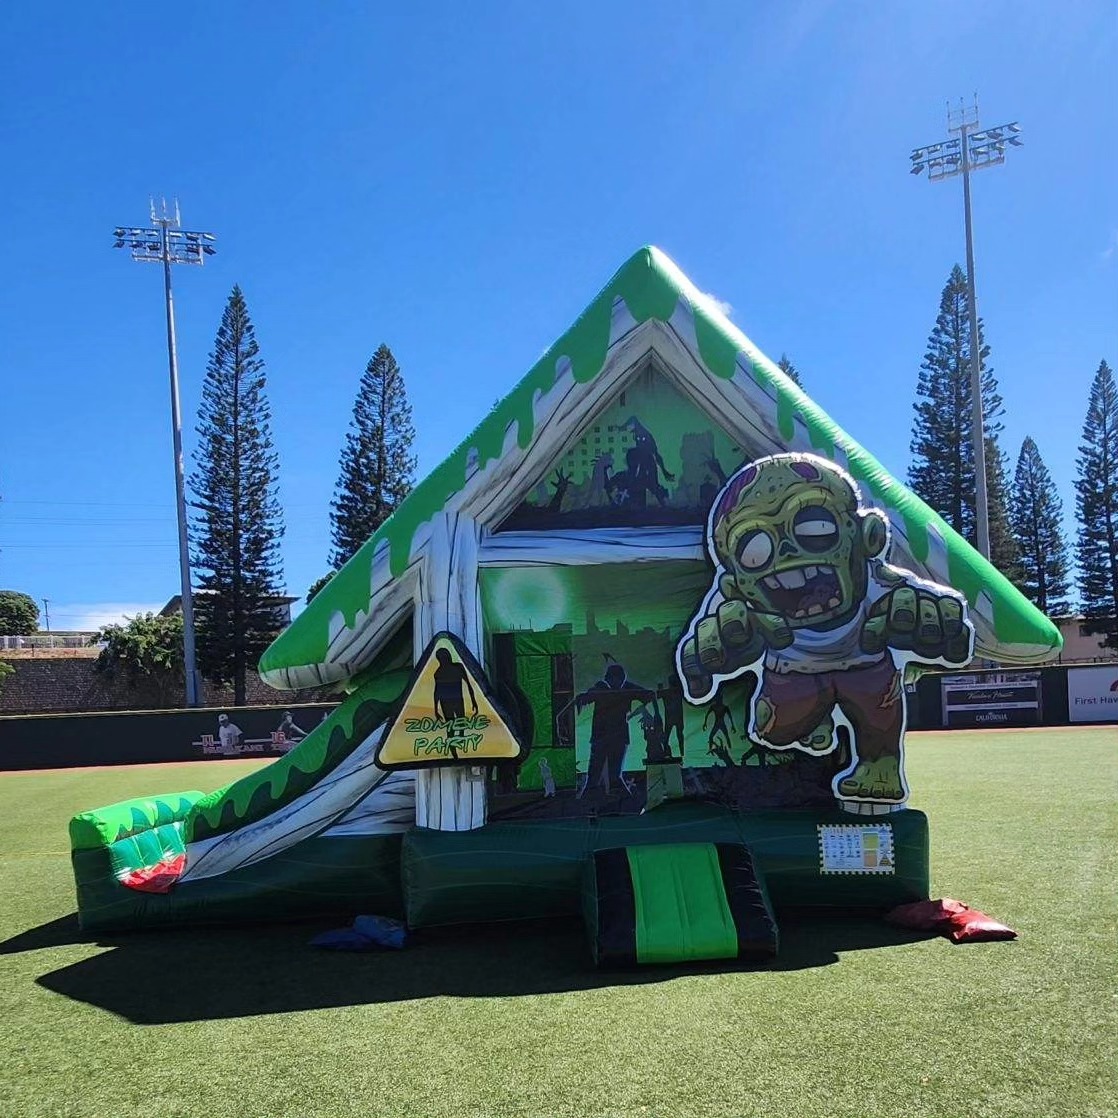 Zombie-themed inflatable bounce house slide with a prominent zombie figure at the entrance, set up on a sunny day with tall pine trees in the background, perfect for children